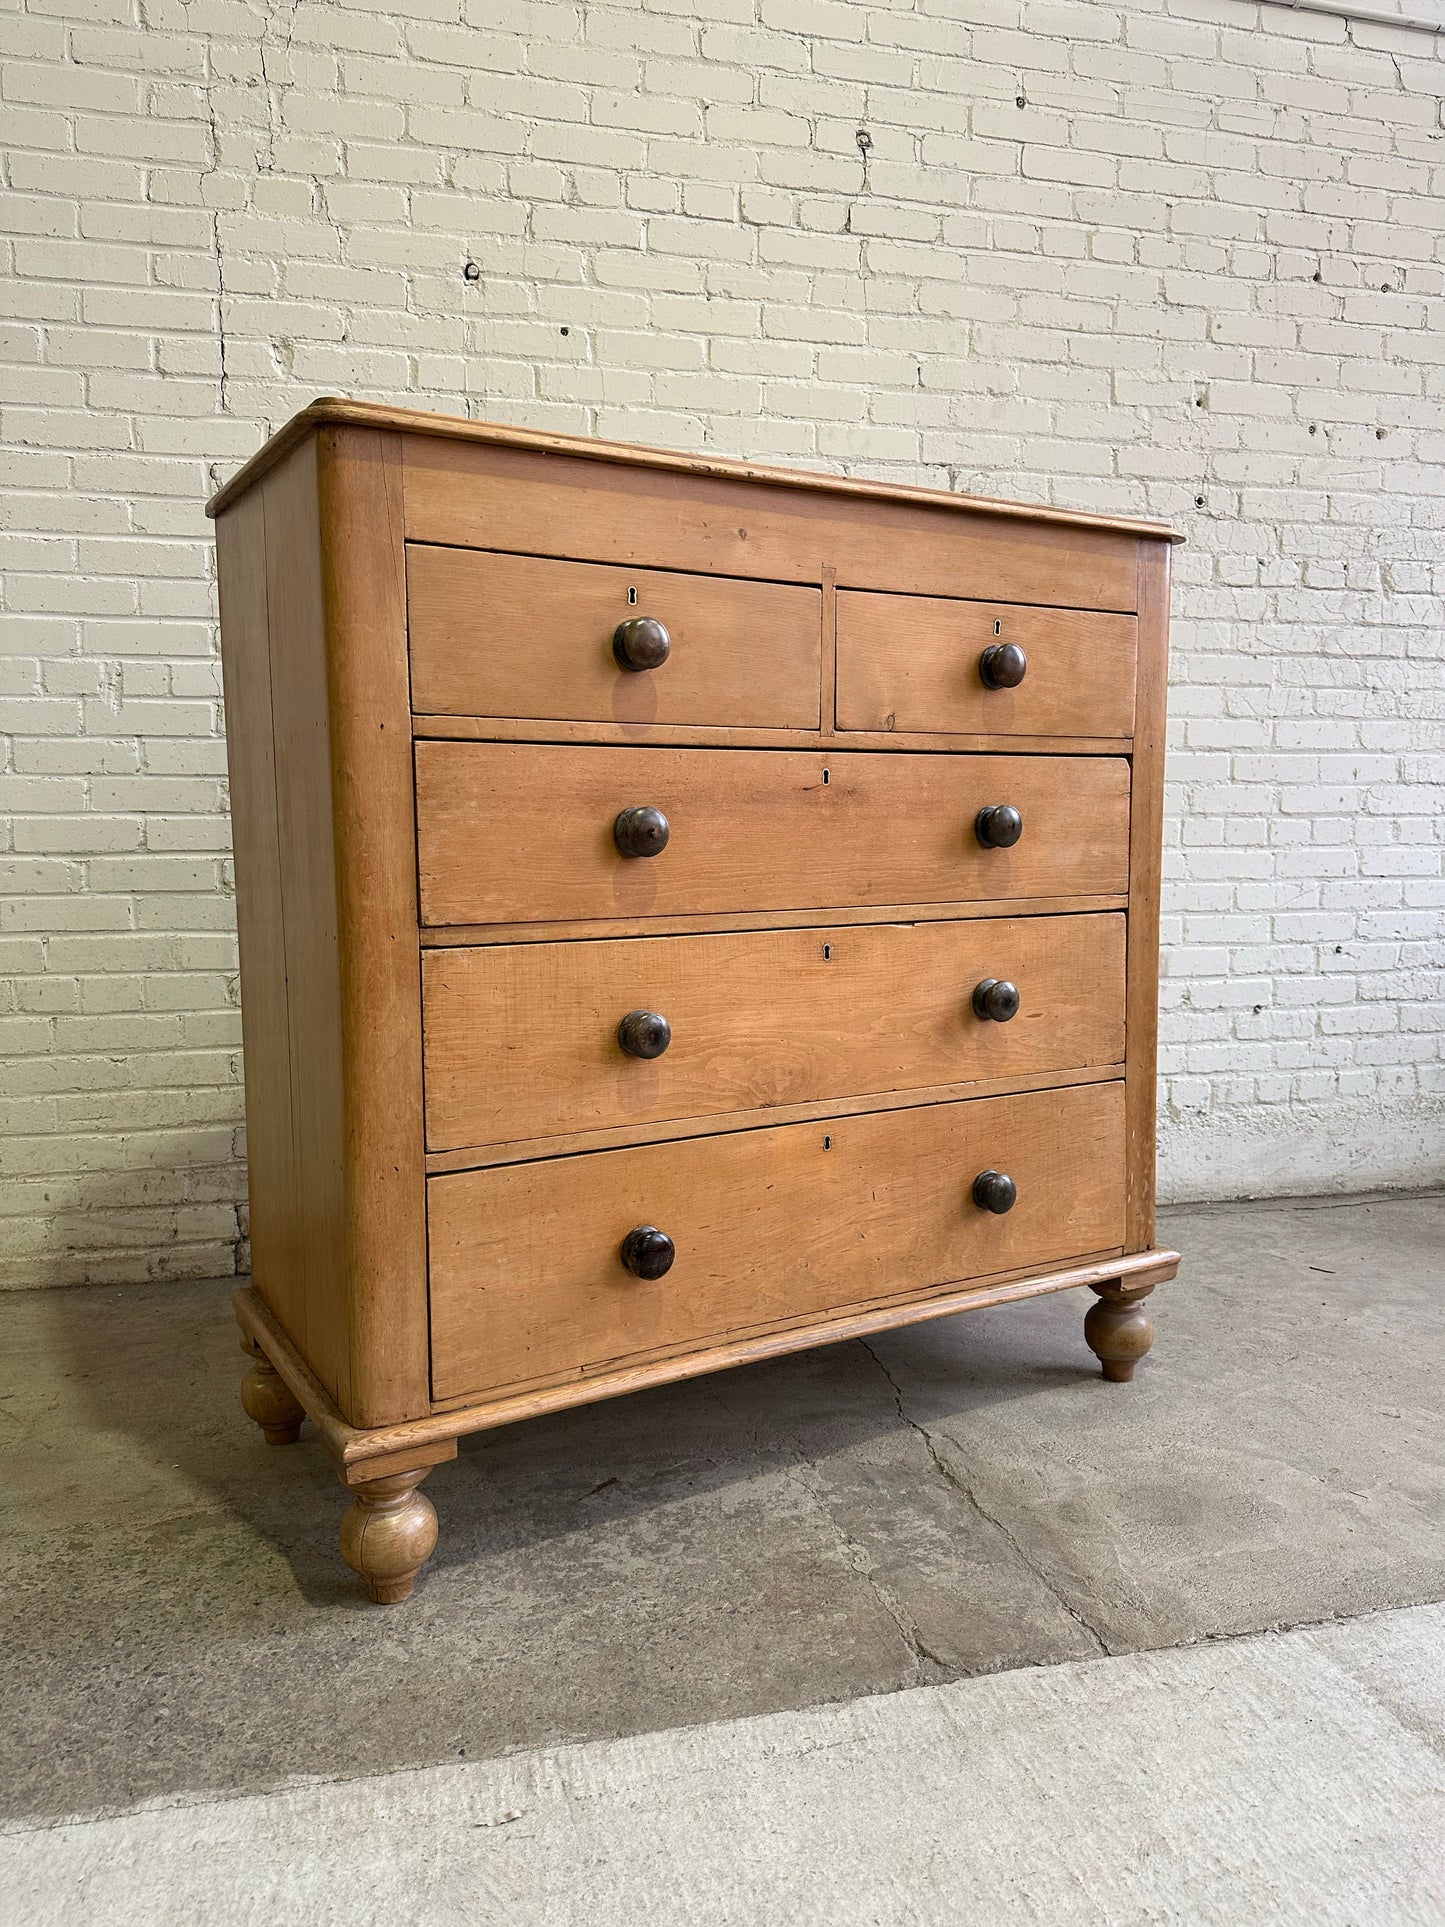 A Large Antique Pine Chest of Drawers with Mahogany Knobs c. 1860